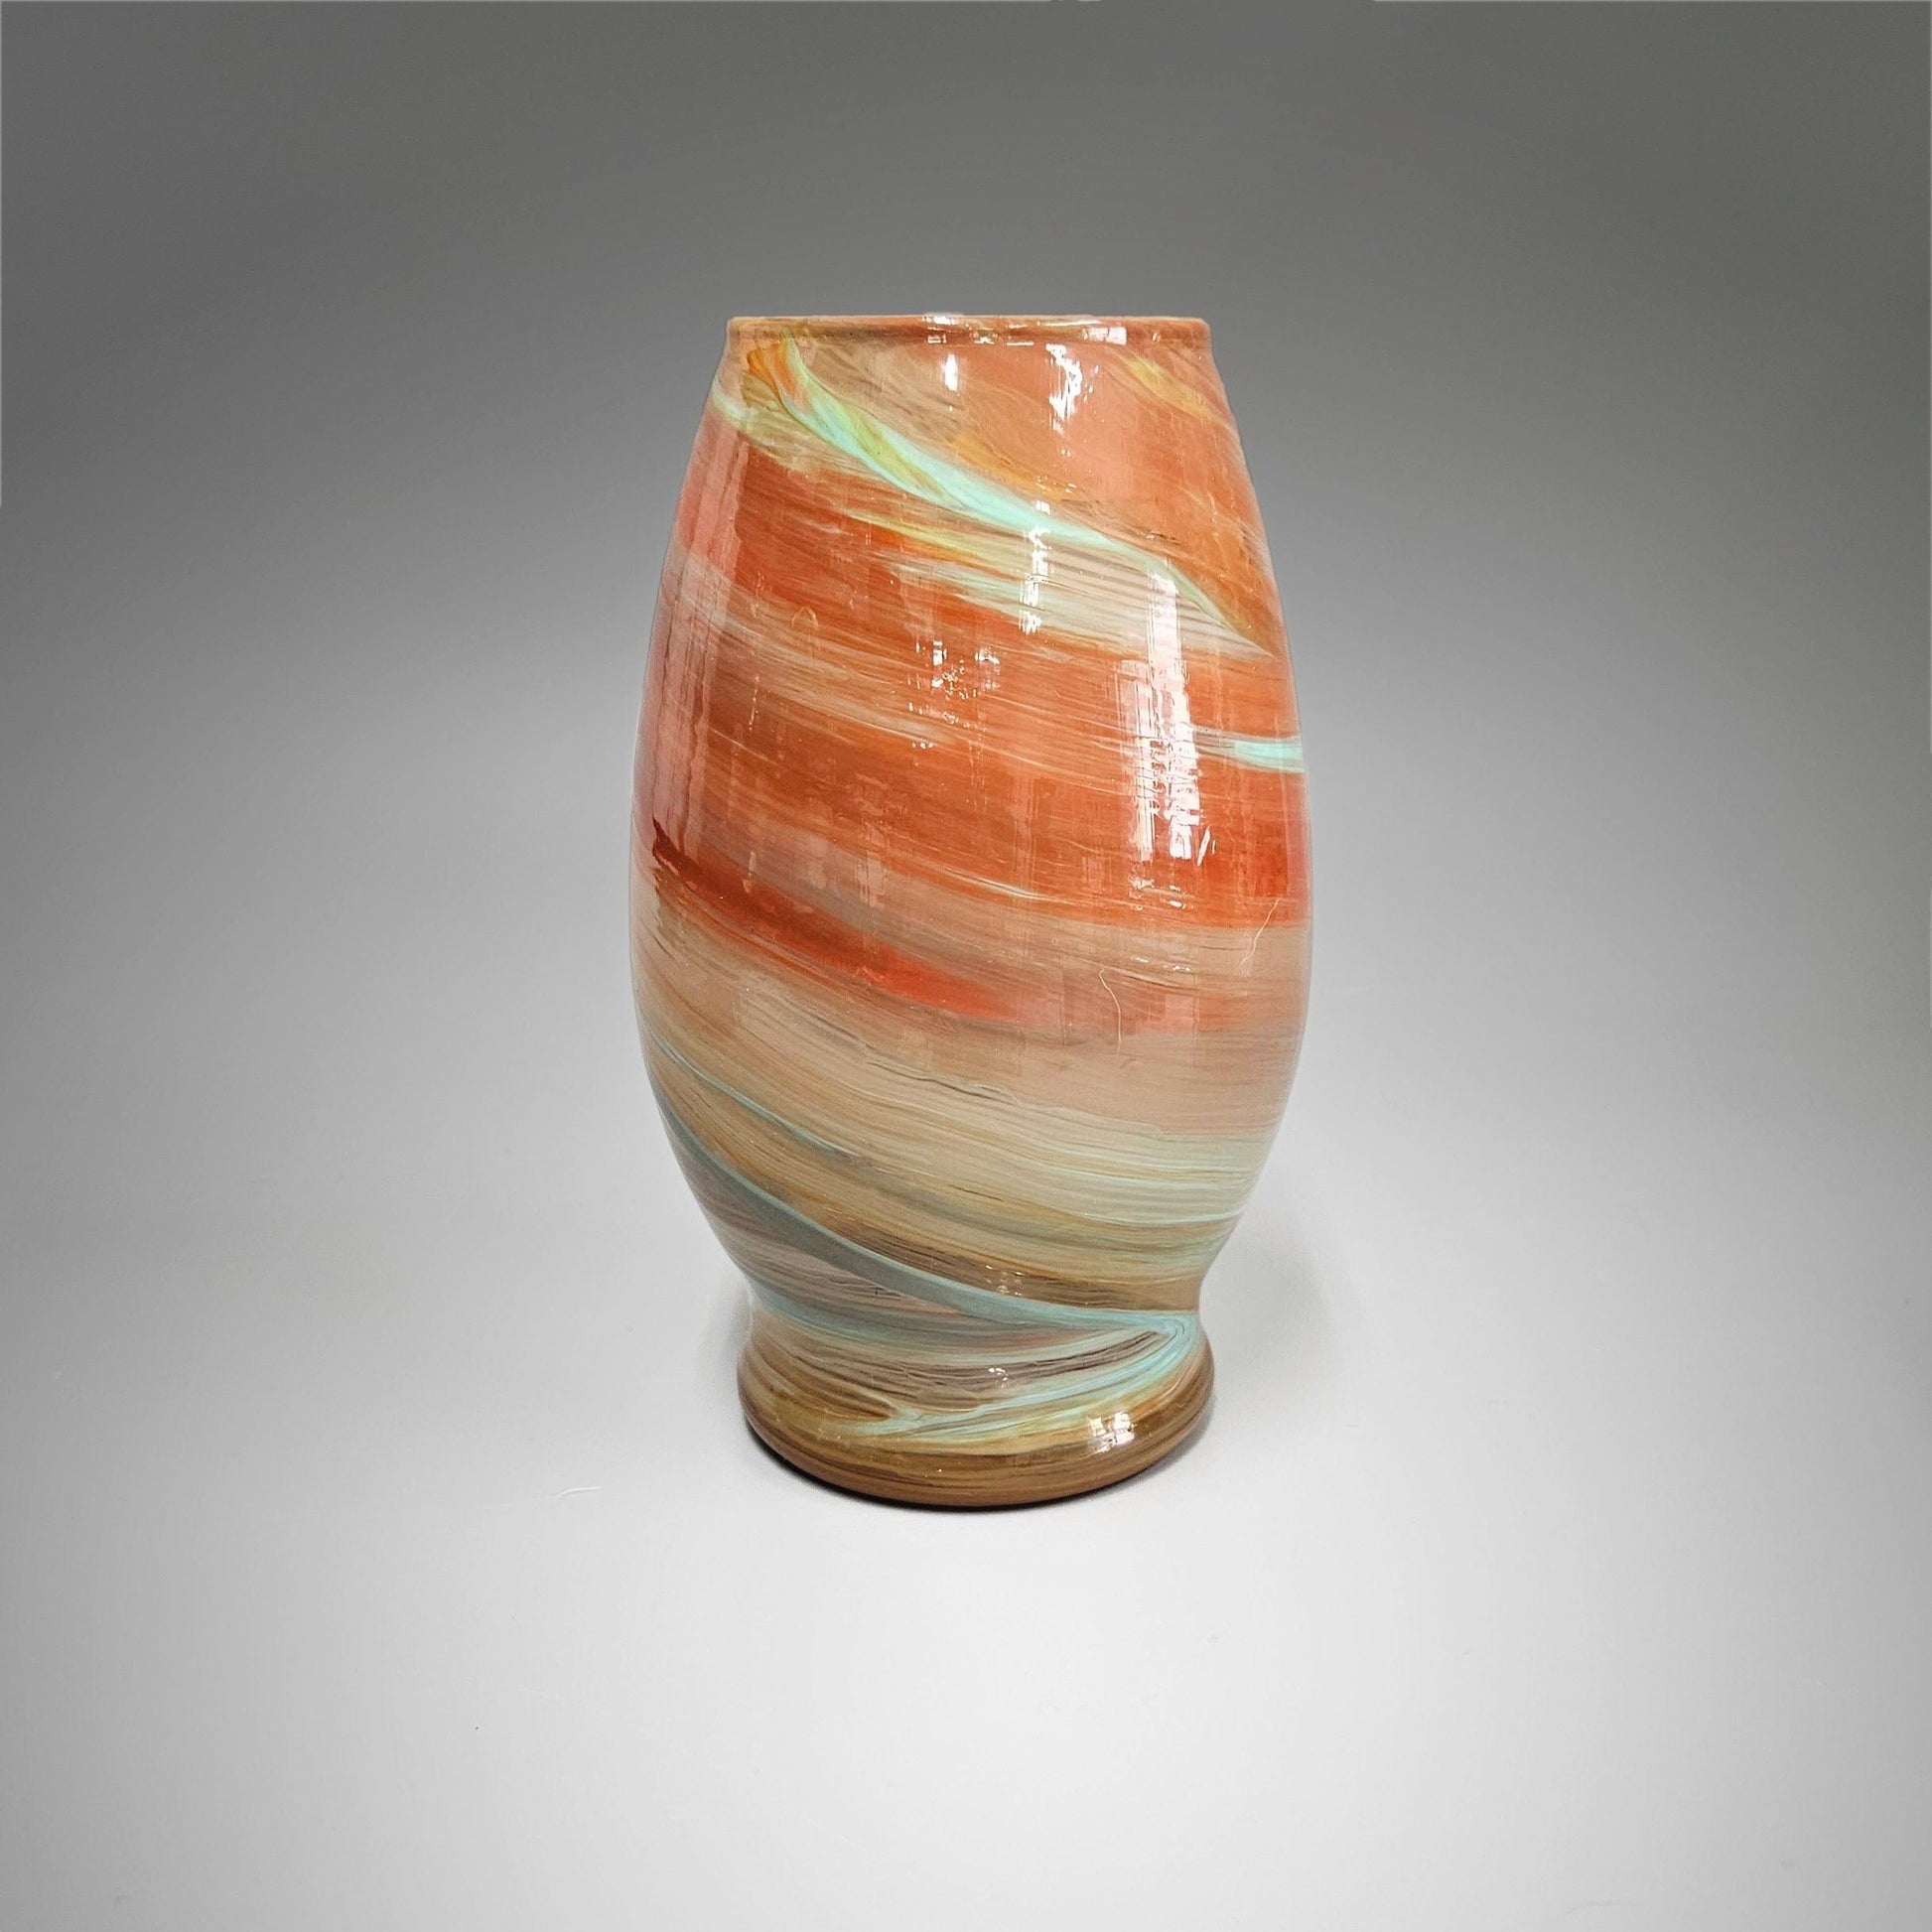 Fluid Art Painted Glass Vase in Terra Cotta | Unique Glass Art Gifts